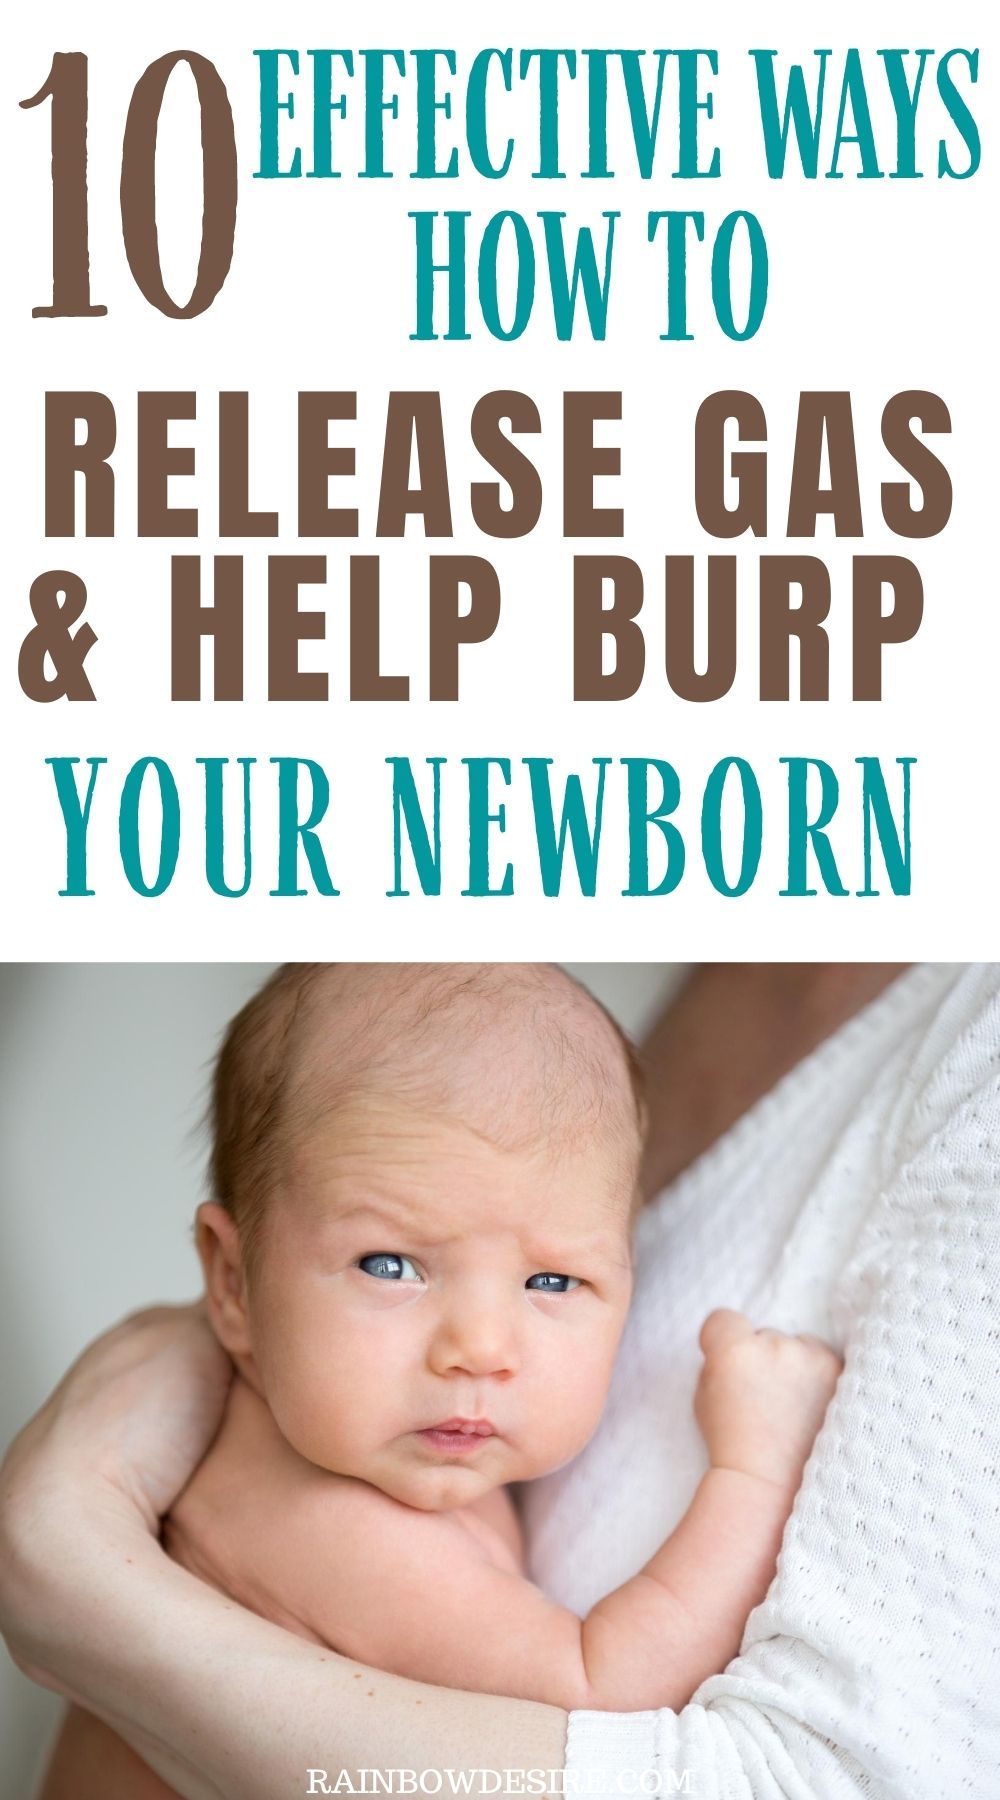 Gas issues in babies